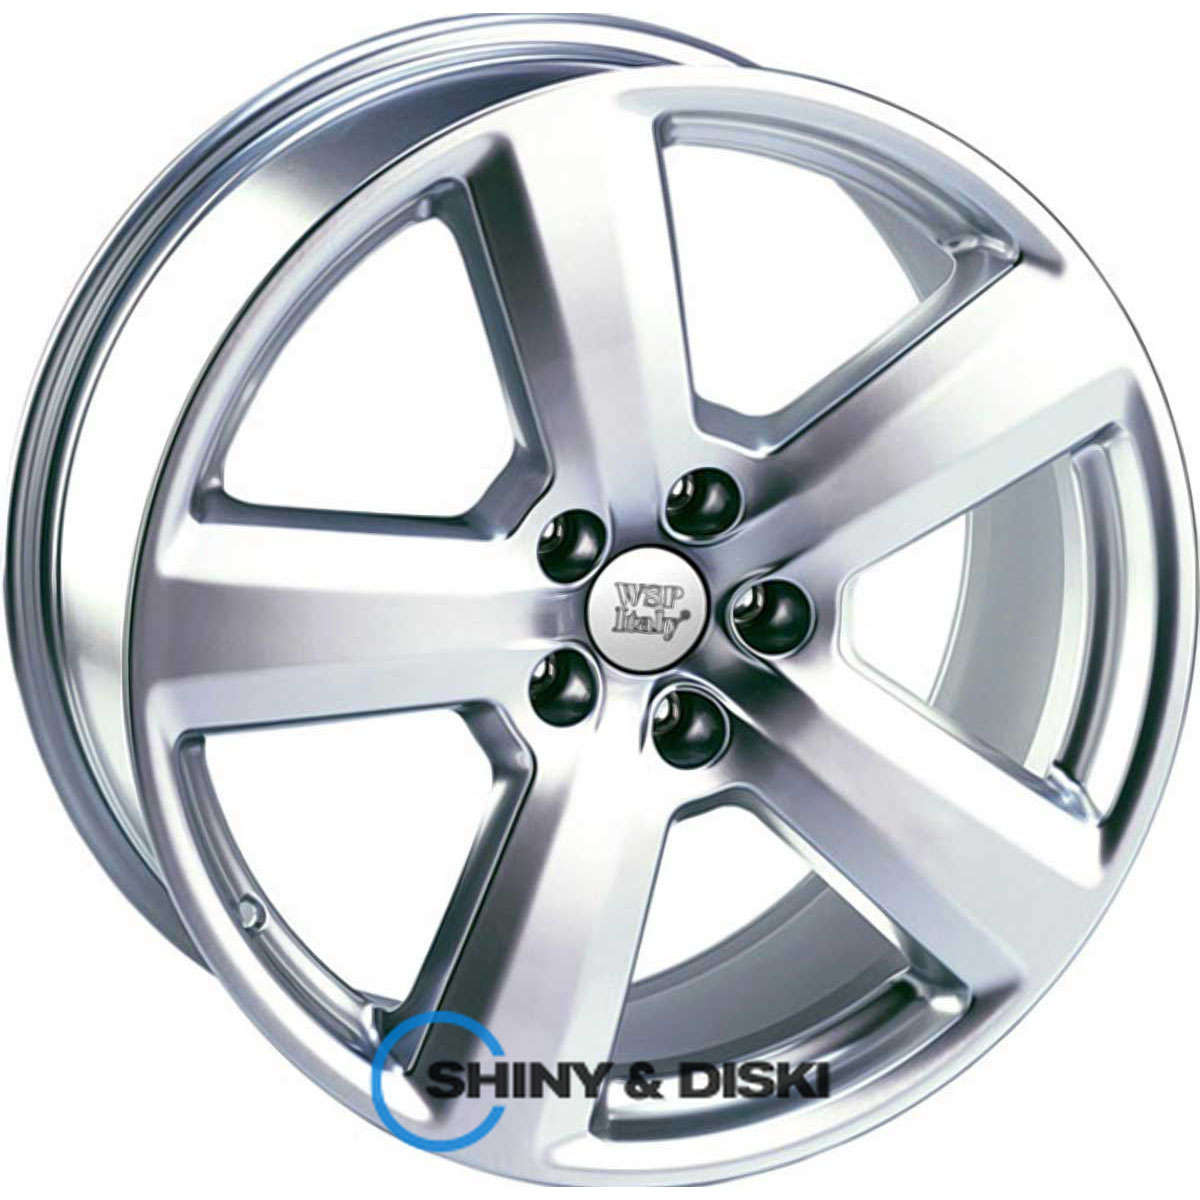 wsp italy audi w534 rs6 vancouver silver shine r16 w7 pcd5x100 et35 dia57.1